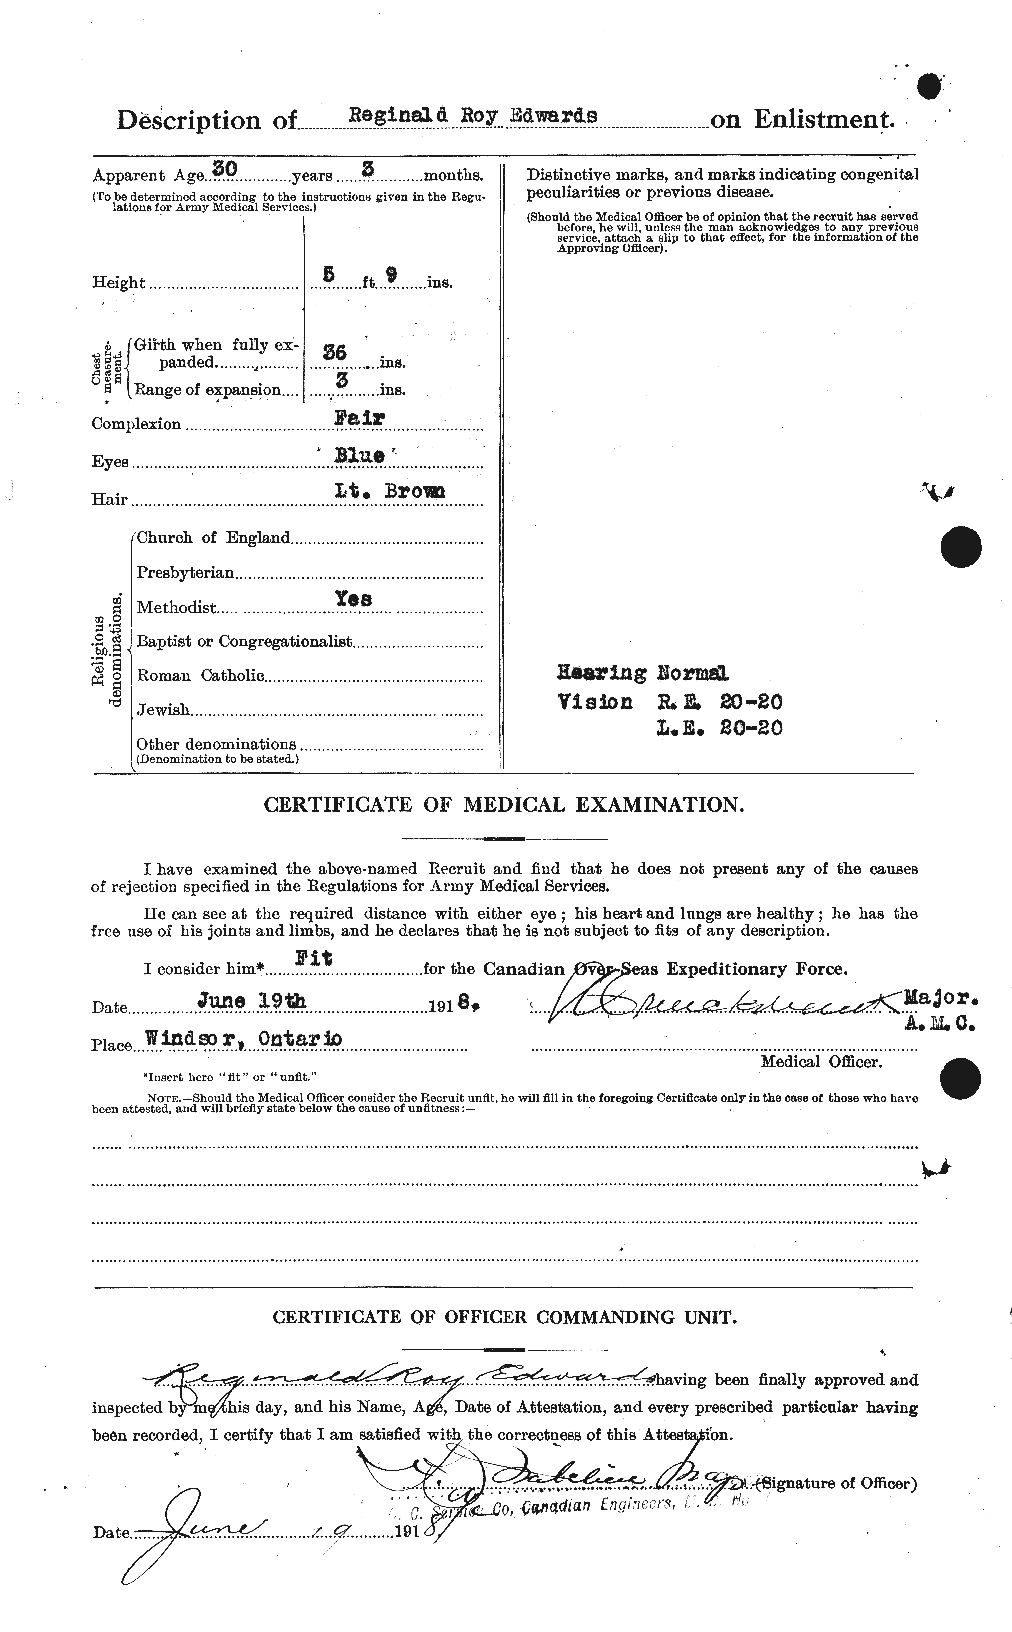 Personnel Records of the First World War - CEF 310250b